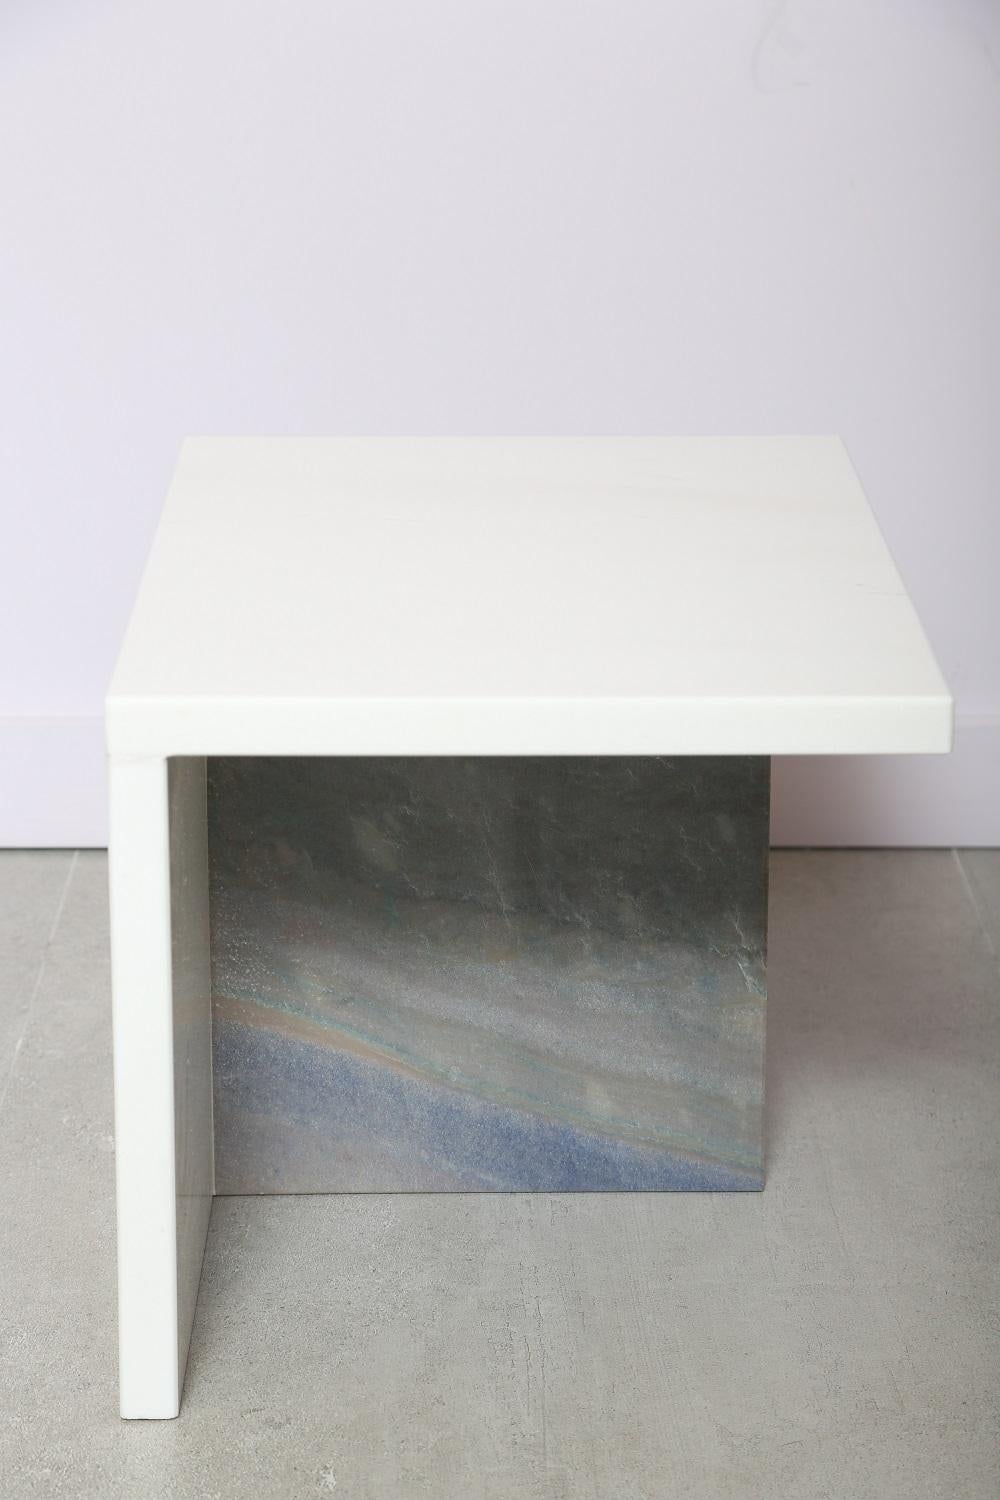 The Marble House White Sivec and Azul Low Side Table.

Can be paired with Tha Marble Huse White Sivec and Azul High Side Table

Dimensions: 15.5